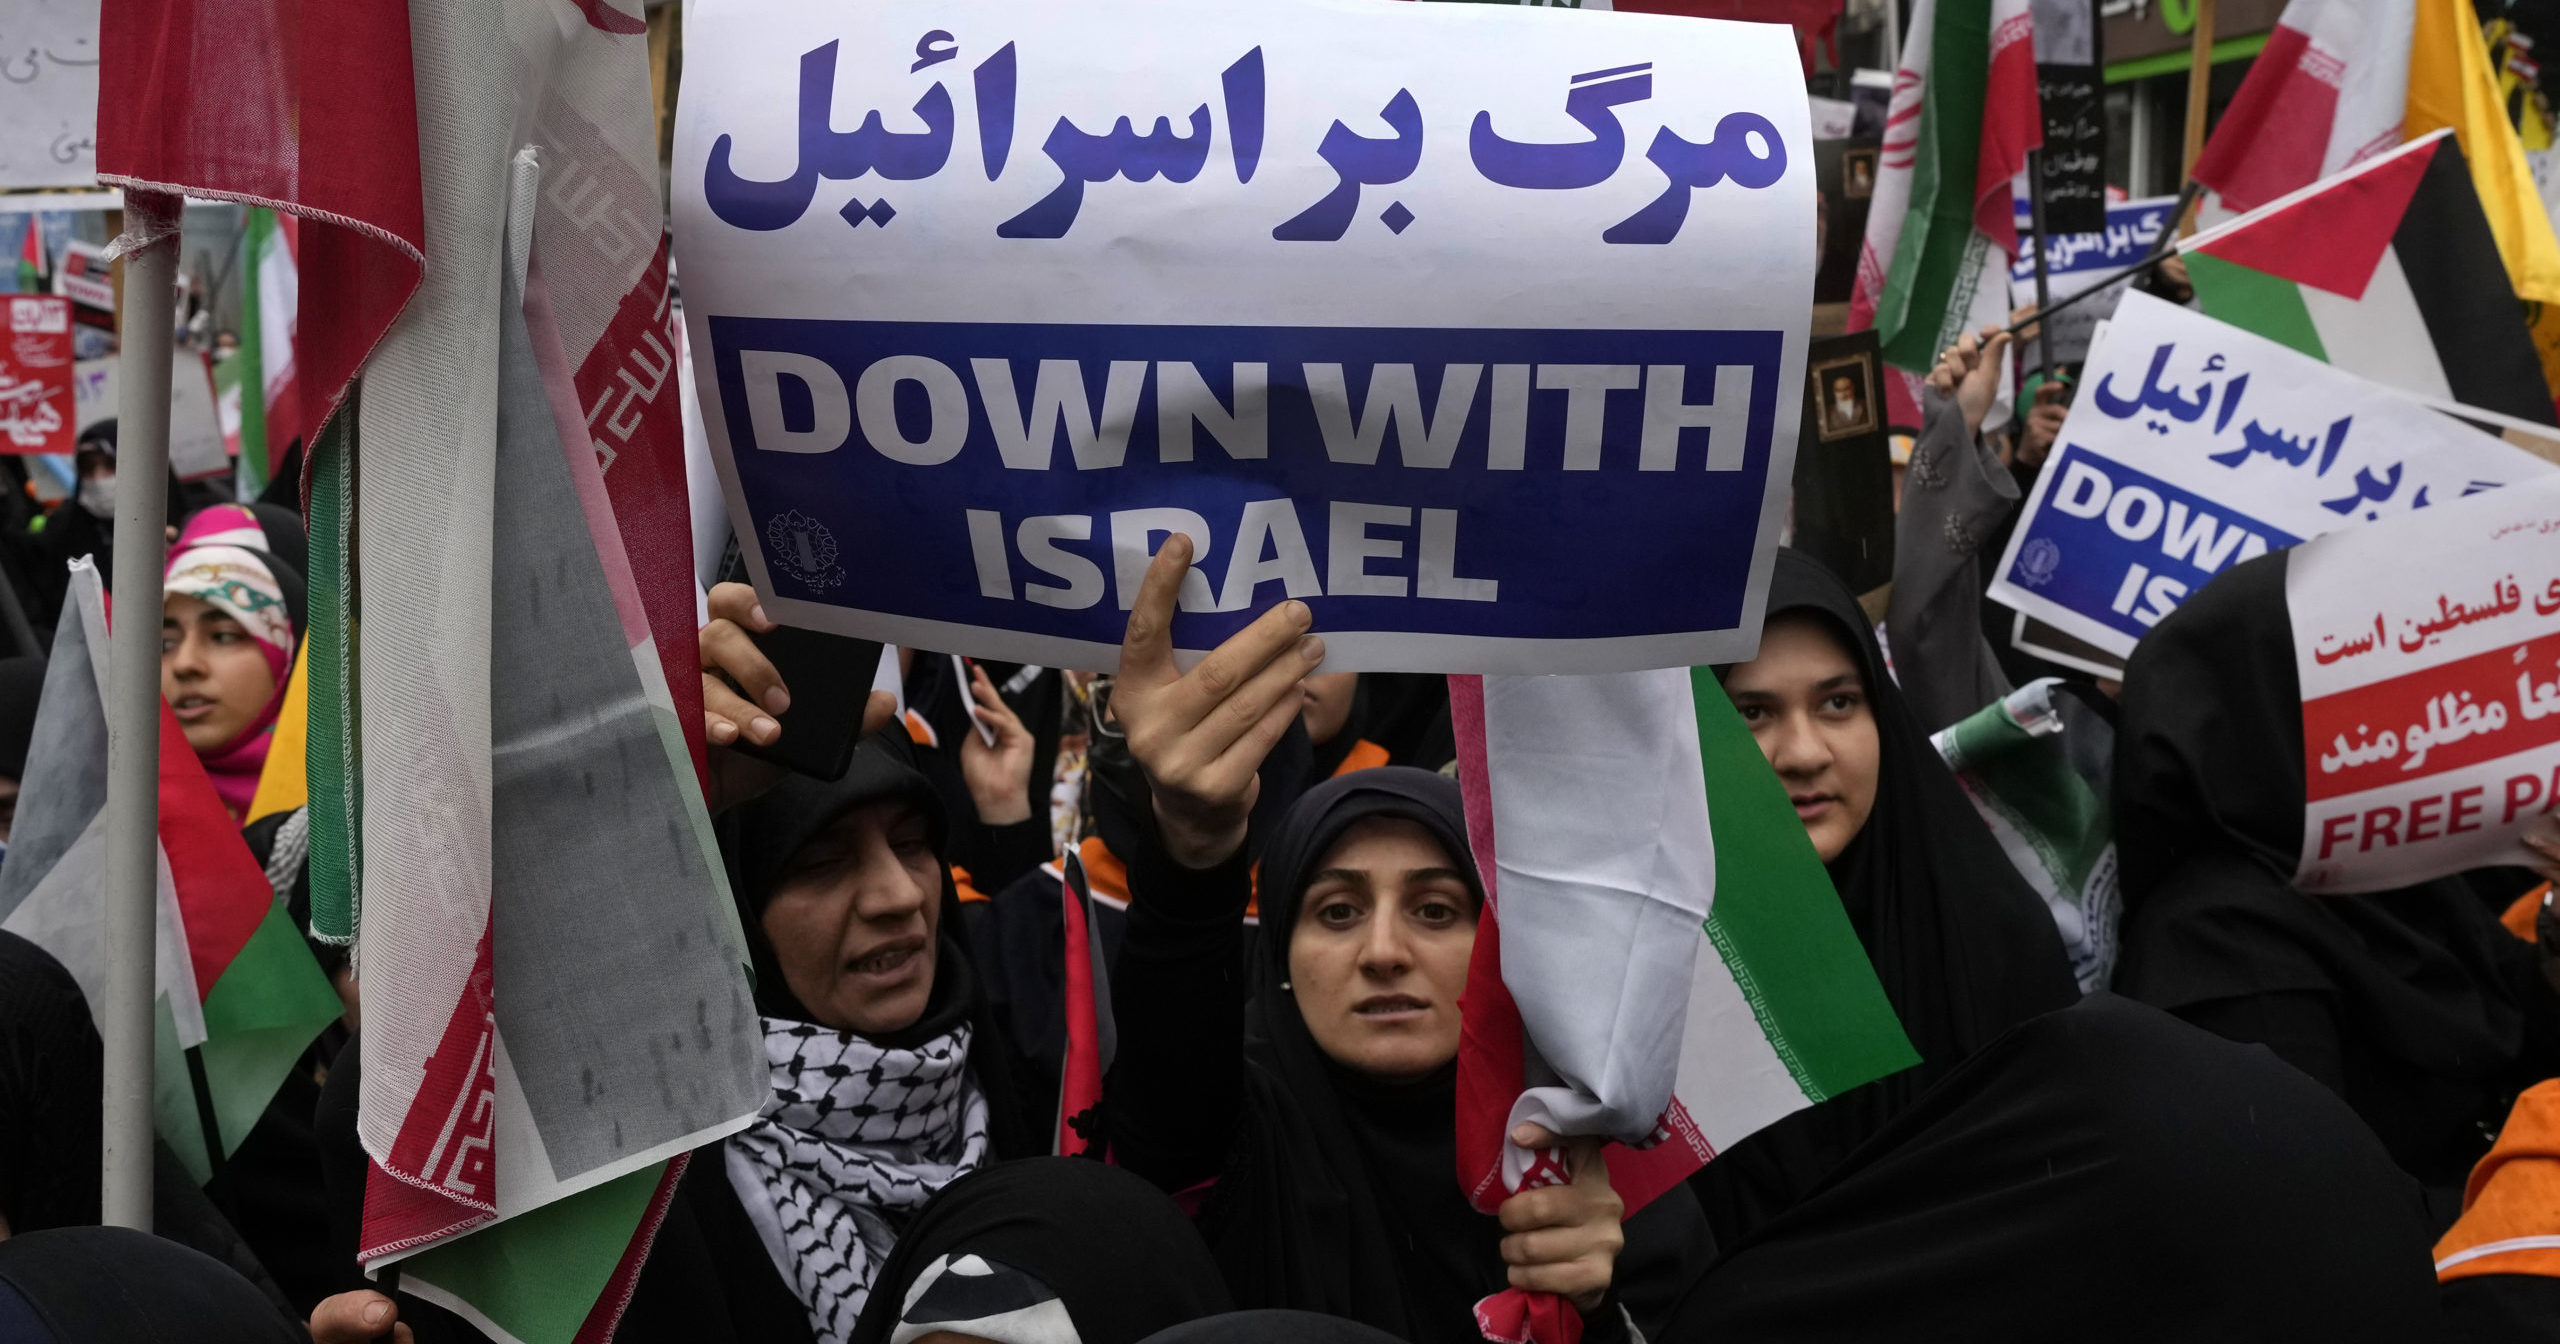 An Iranian demonstrator holds an anti-Israeli placard during a Saturday rally in front of the former U.S. Embassy in Tehran, Iran.